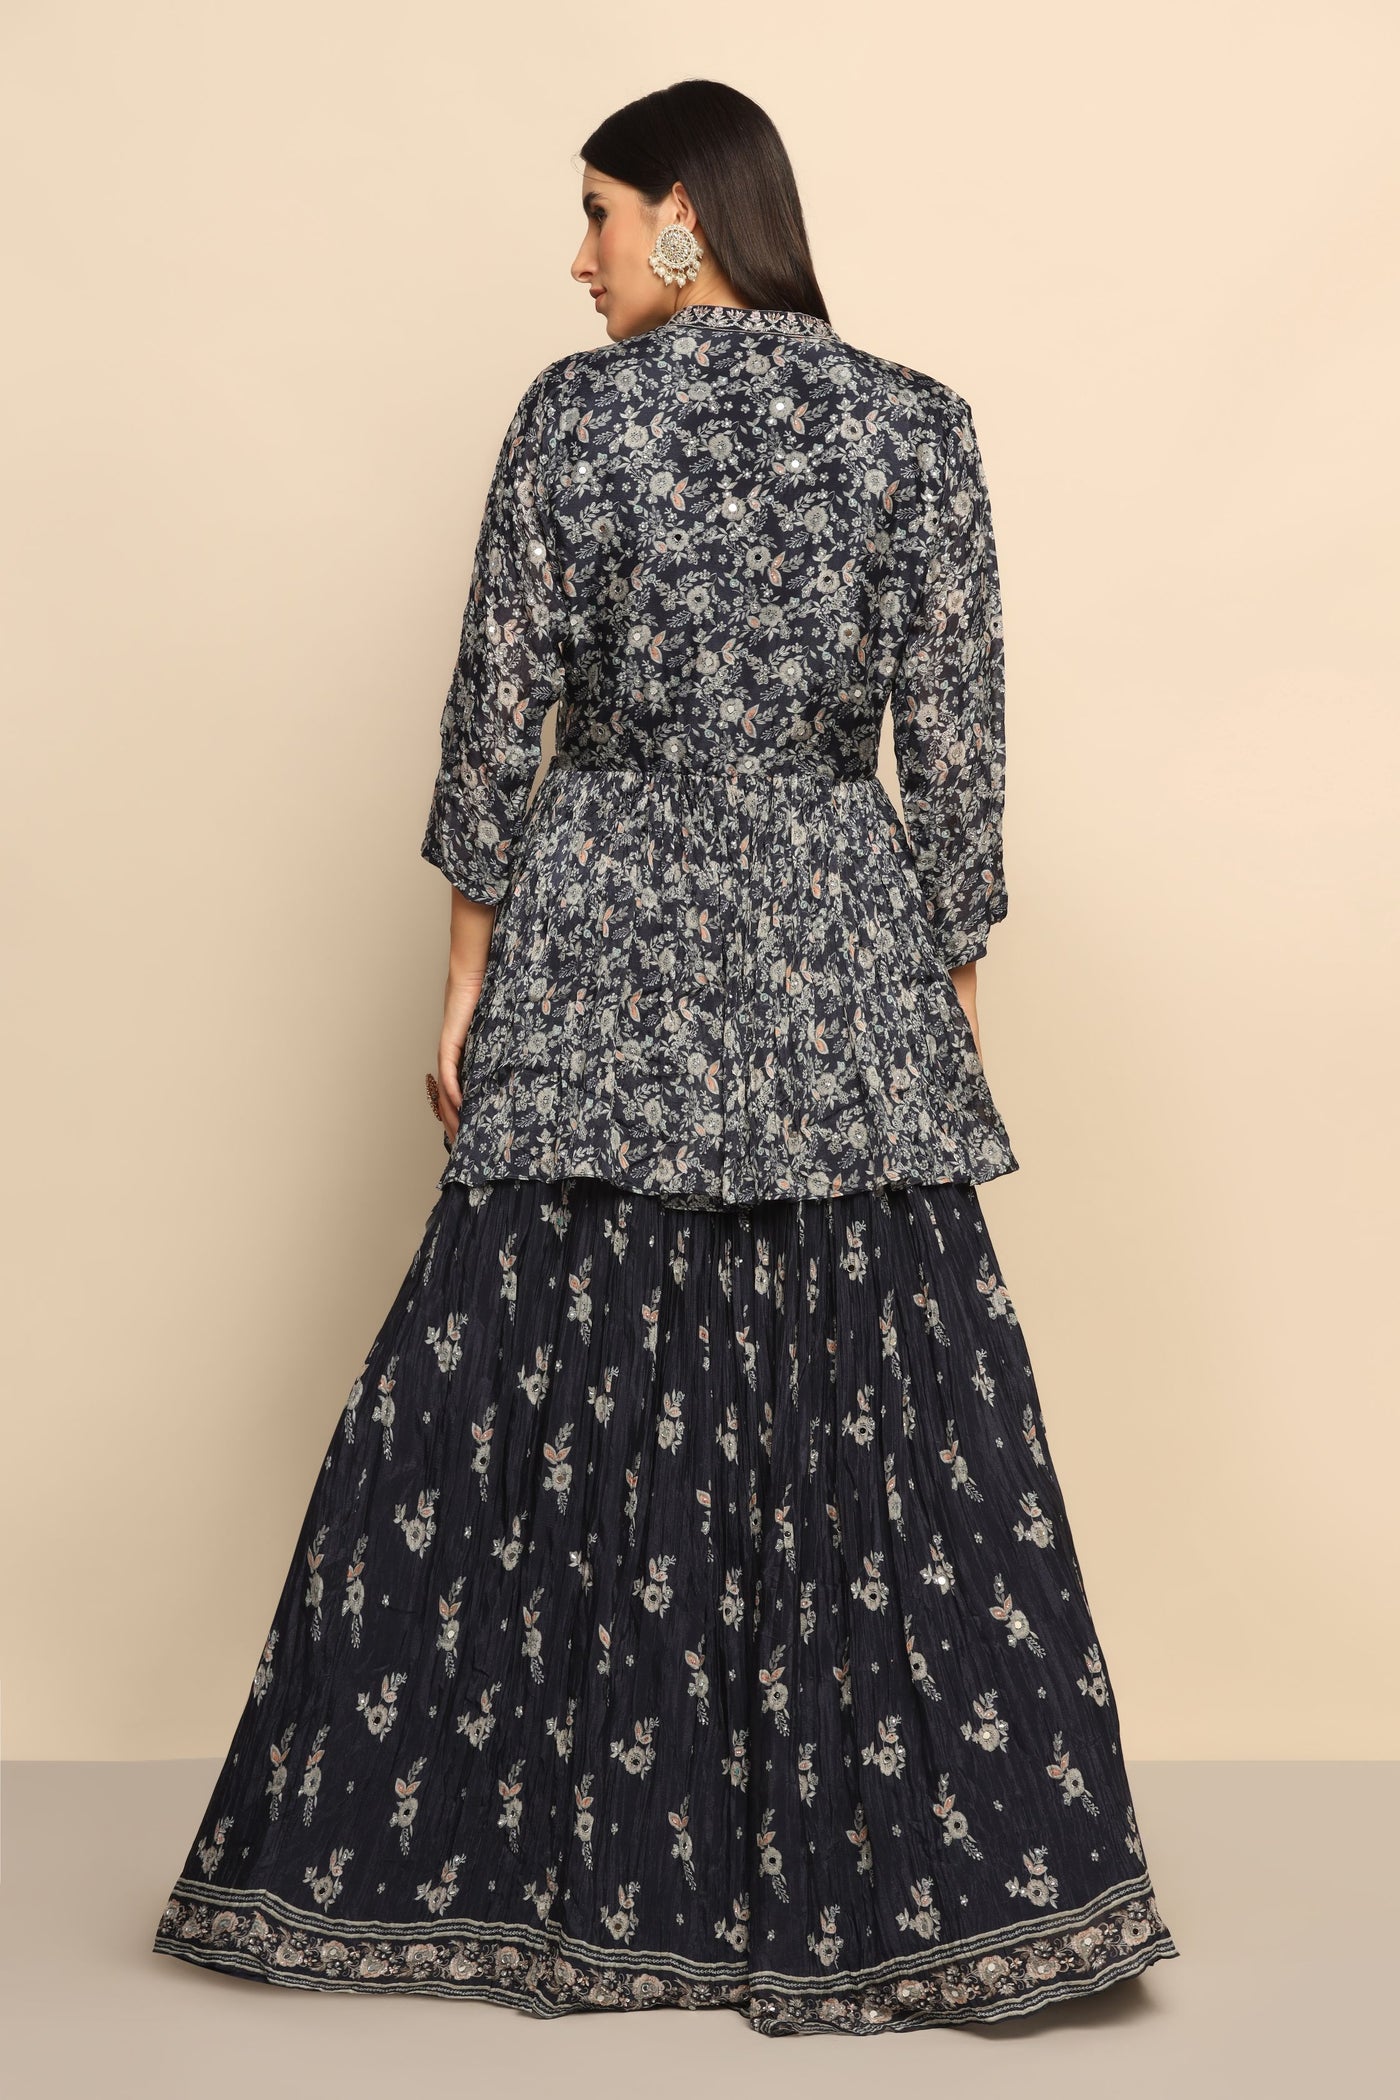 Elegant Navy Blue Printed Lehenga with Thread Work, Sequins, and Mirror - Embrace Contemporary Grace